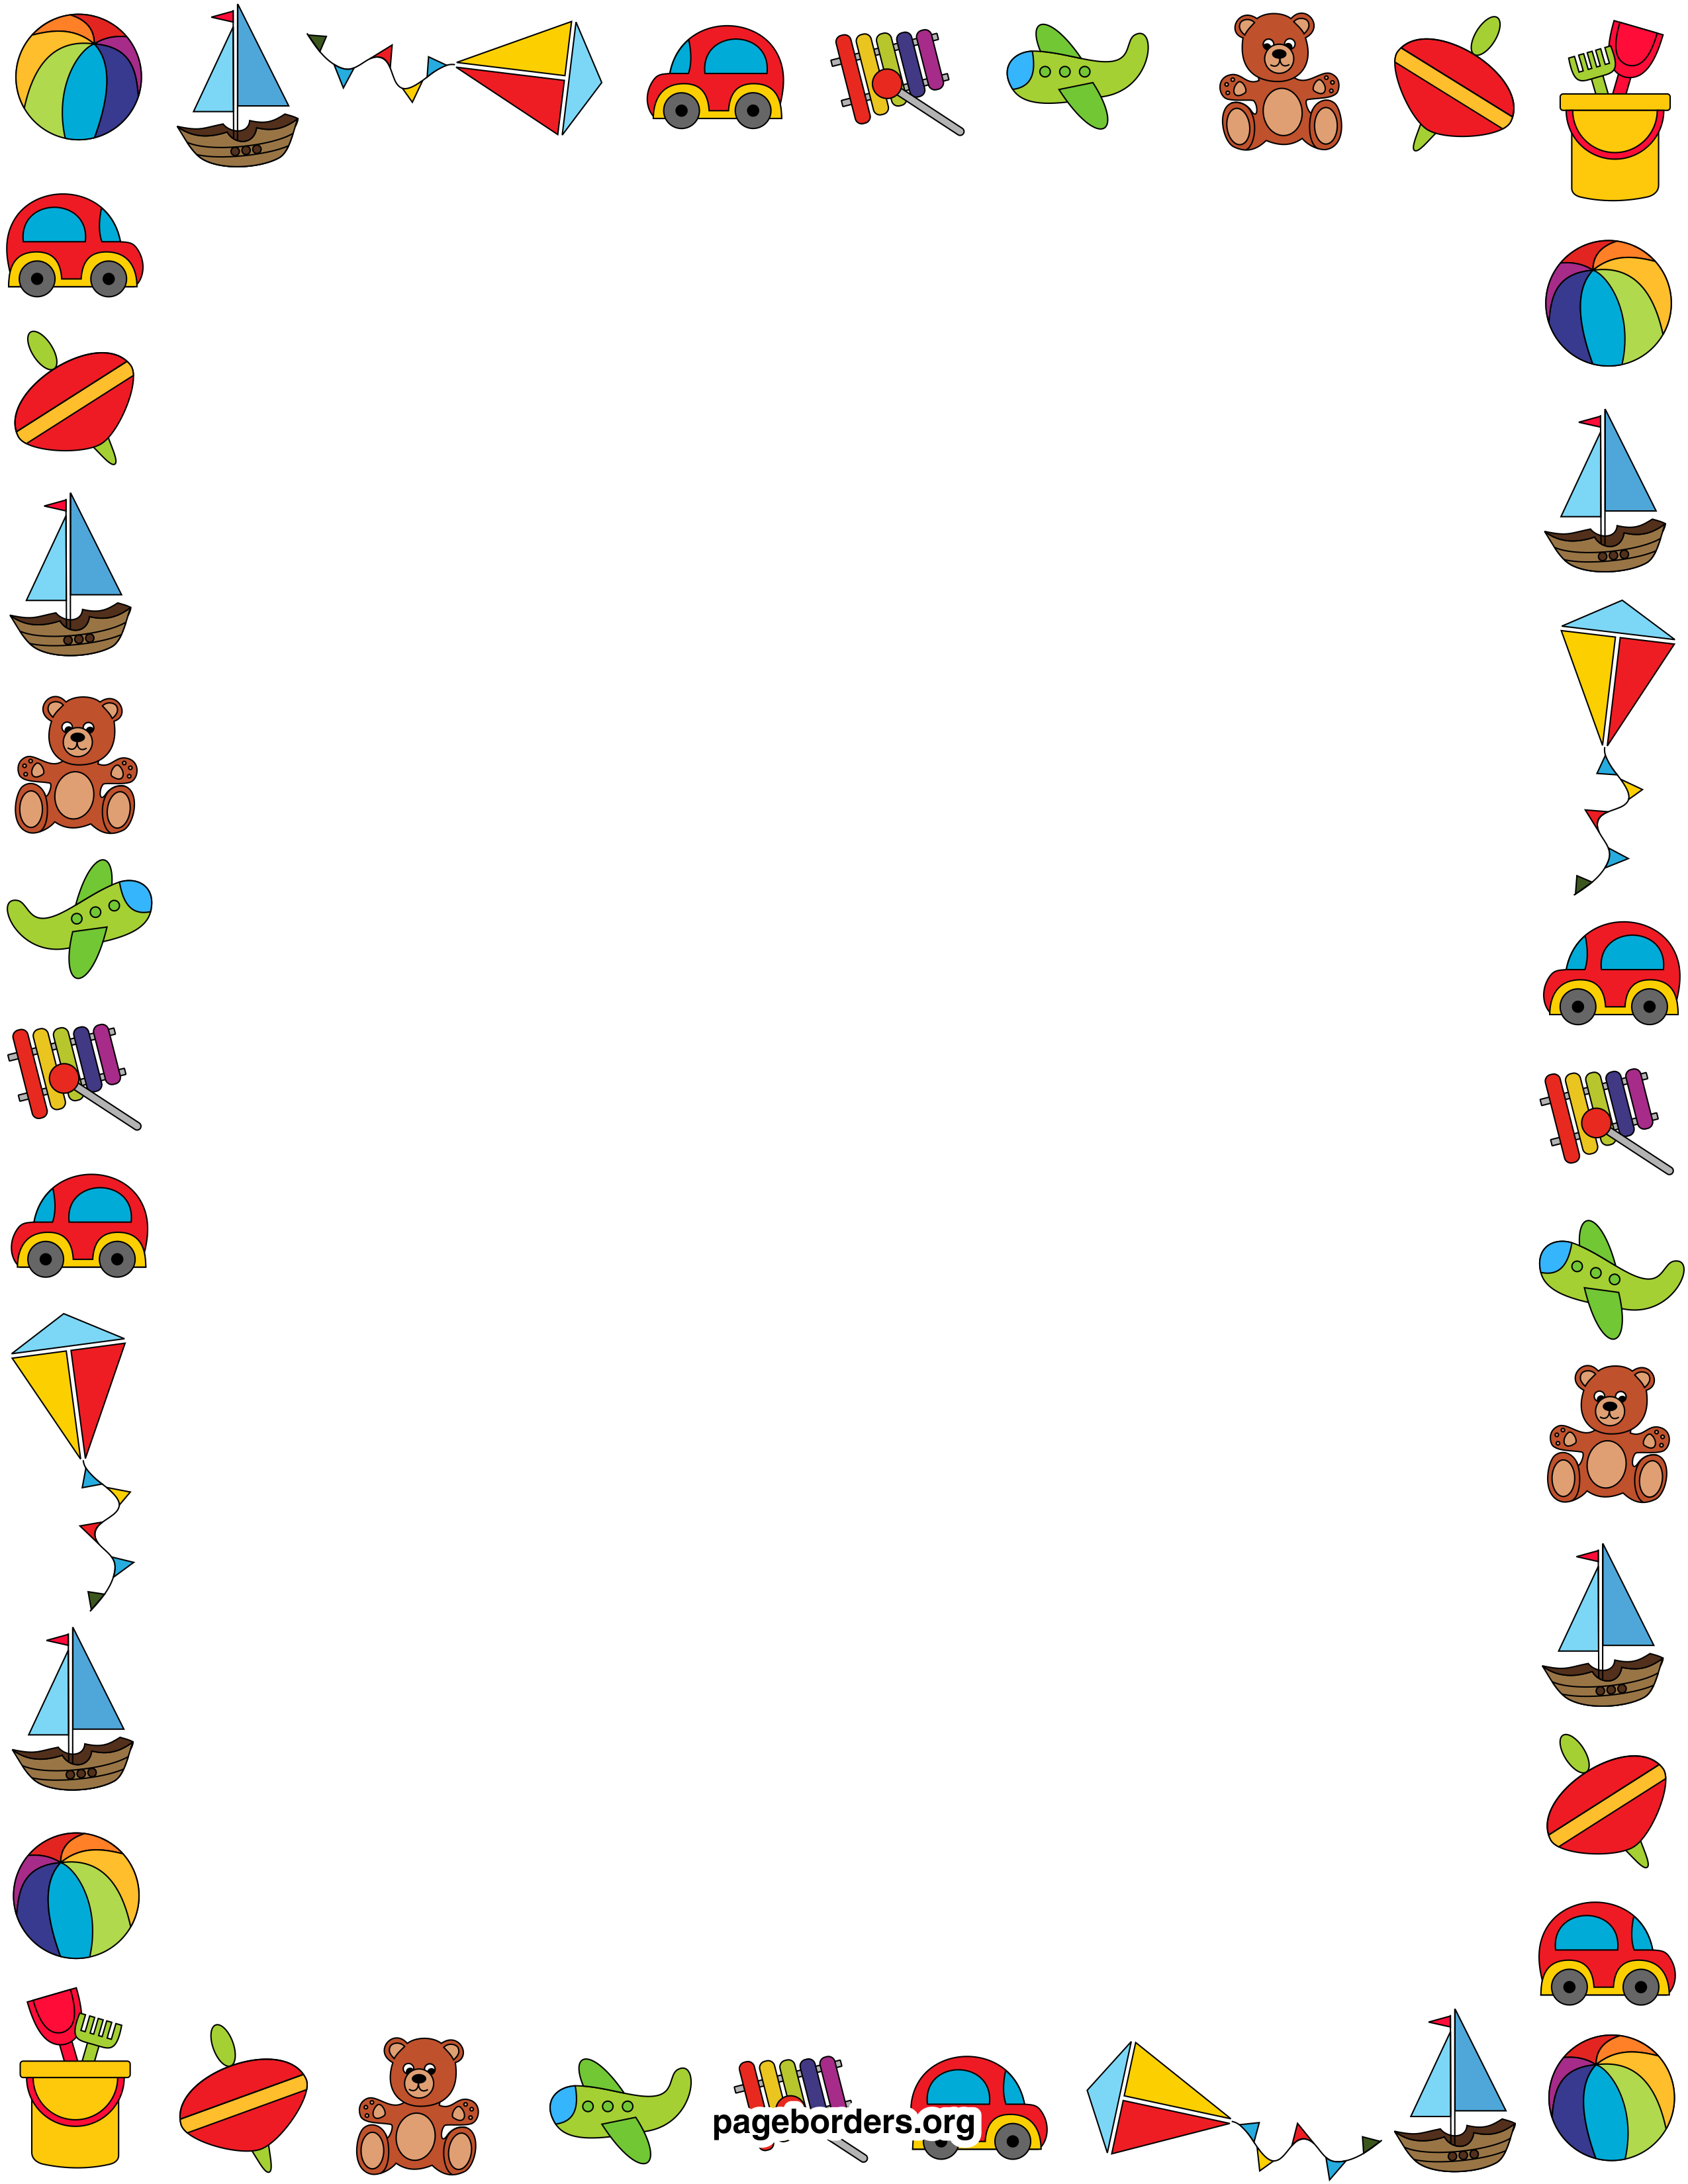 Free Kid's Borders: Clip Art, Page Borders, and Vector Graphics